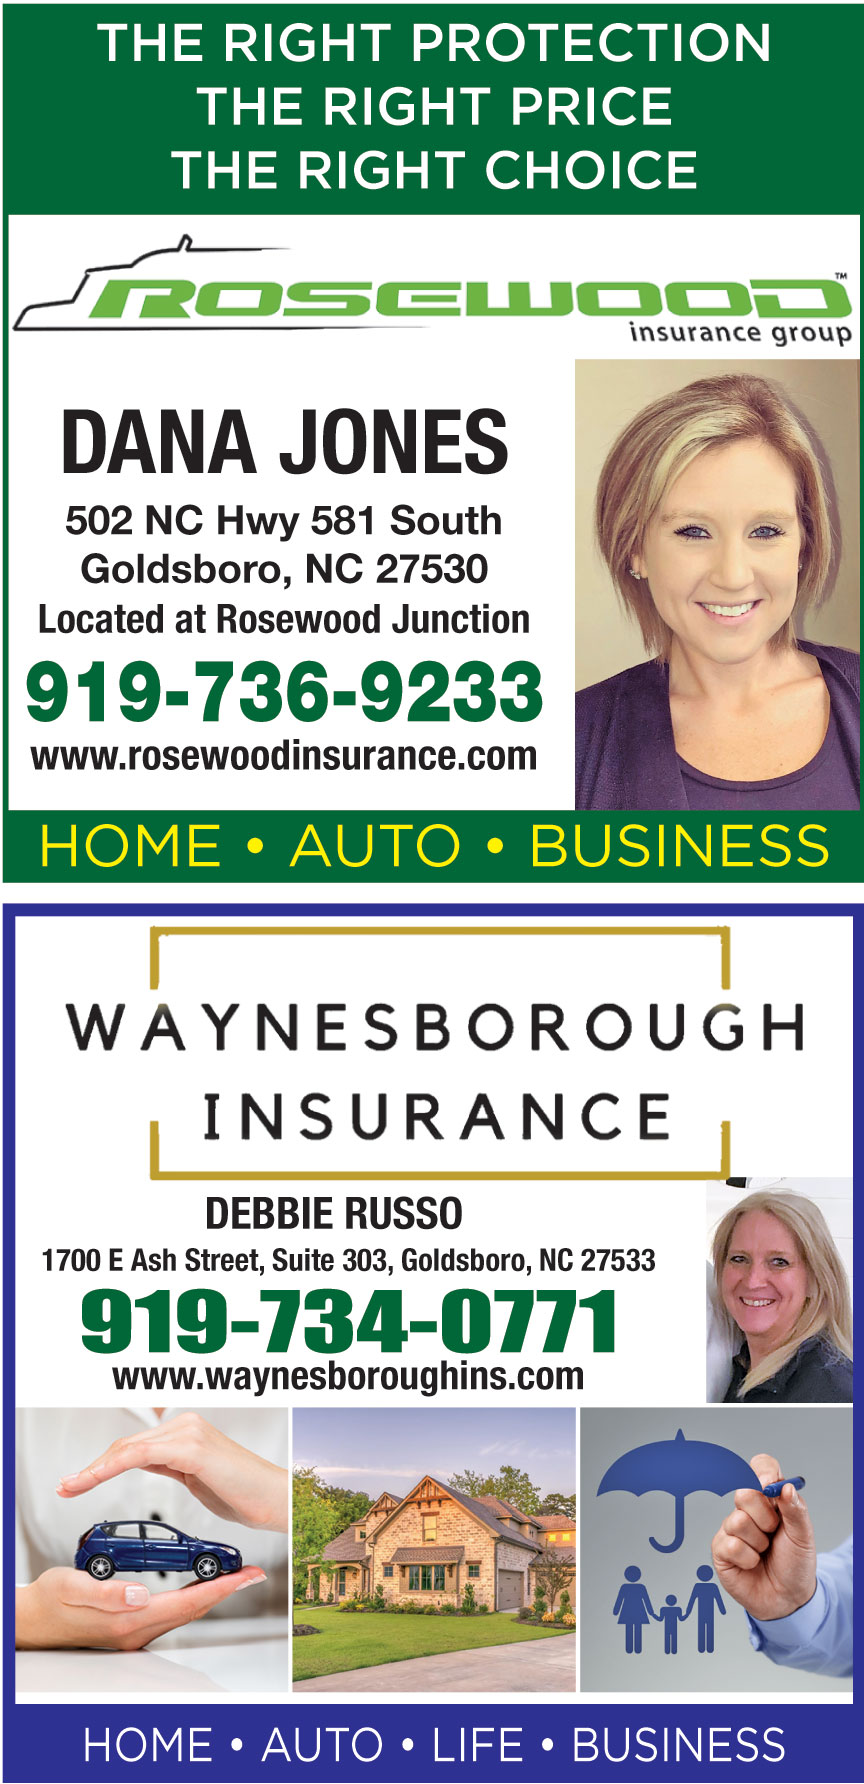 ROSEWOOD INSURANCE GROUP